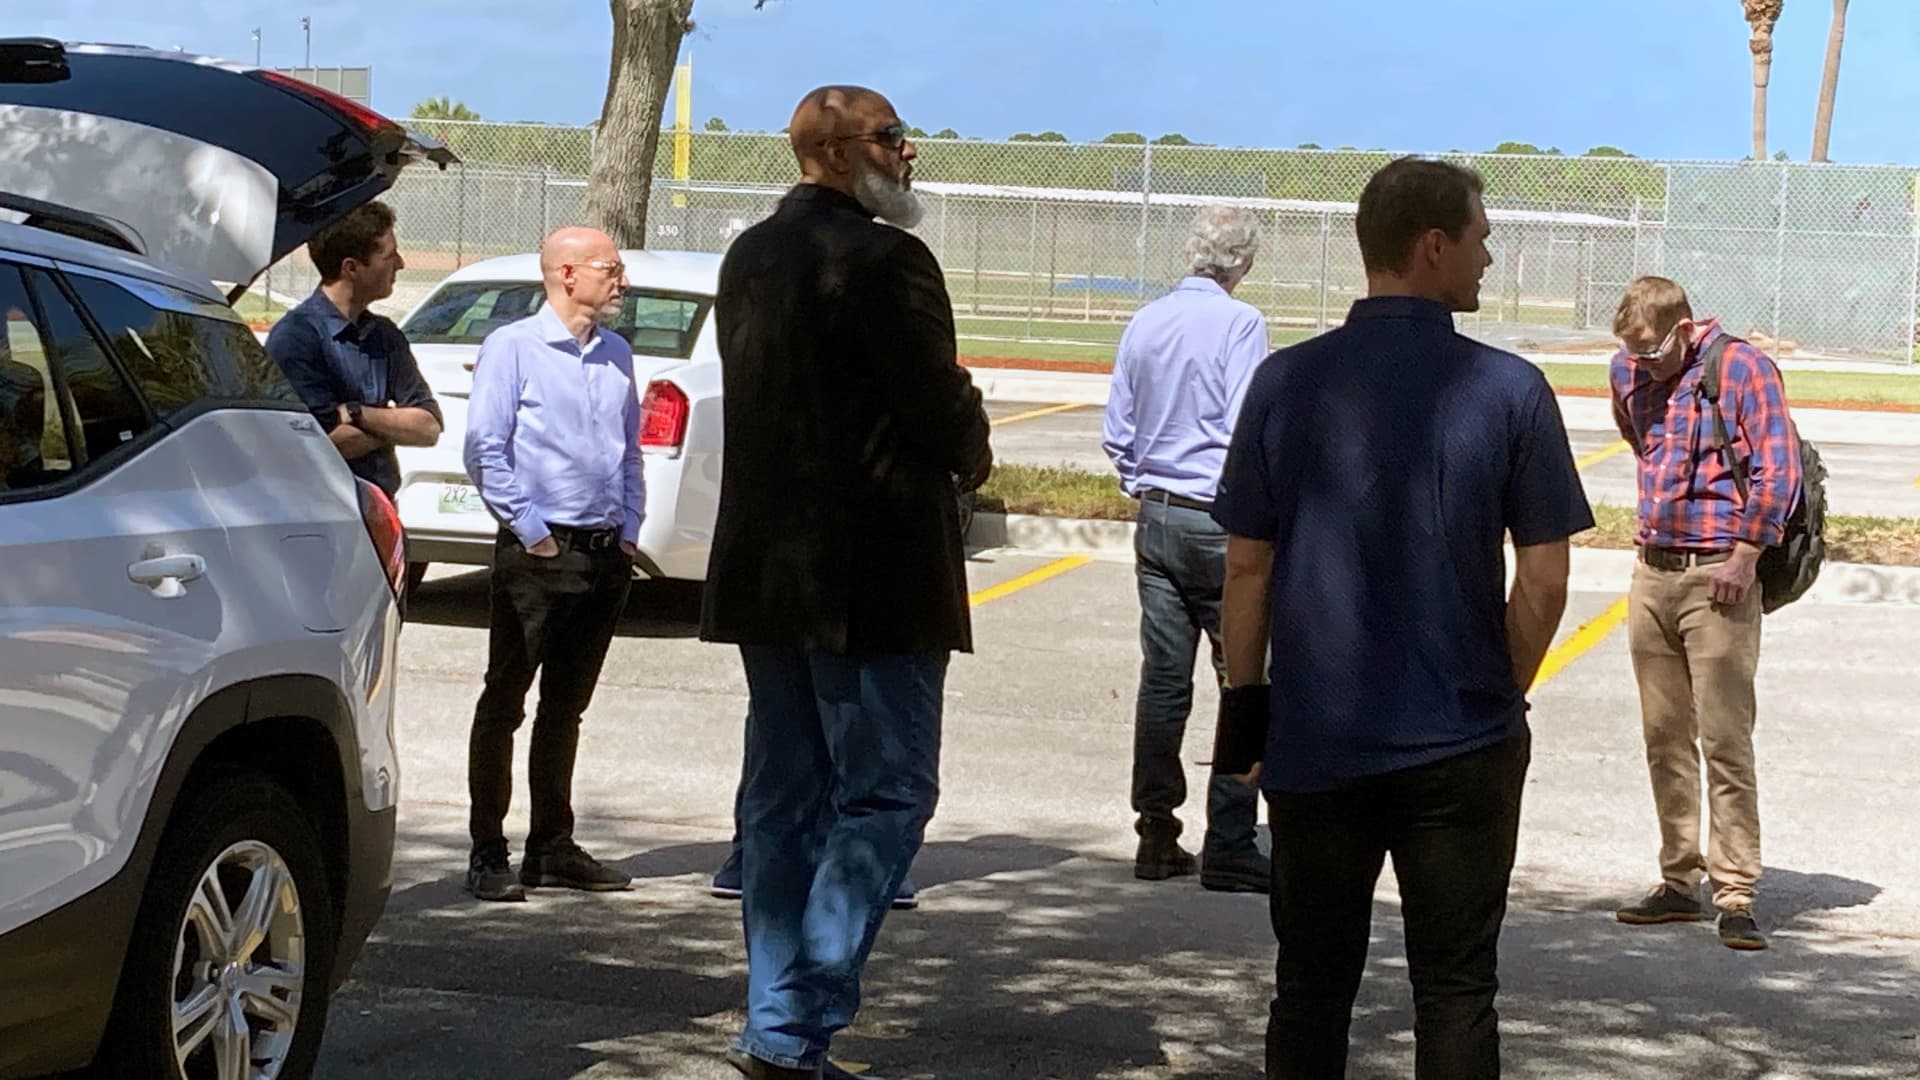 Major League Baseball Players Association executive director Tony Clark, left foreground, and chief negotiator Bruce Meyer, second from left, arrive at Roger Dean Stadium in Jupiter, Fla., Monday, Feb. 21, 2022.